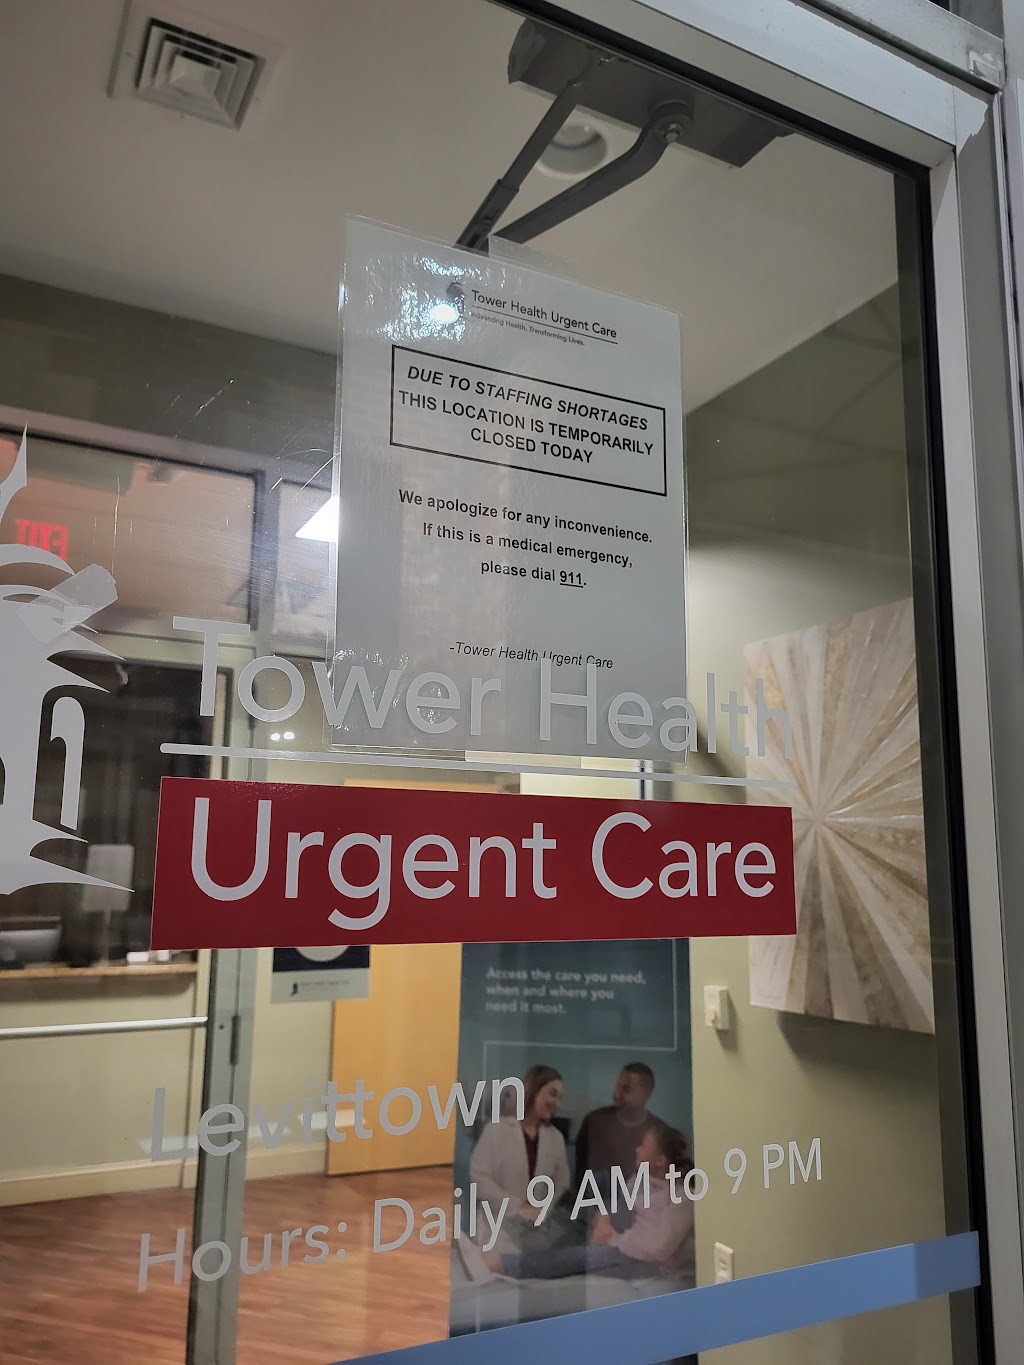 Tower Health Urgent Care - Levittown | 8919 New Falls Rd, Levittown, PA 19054 | Phone: (267) 580-4200